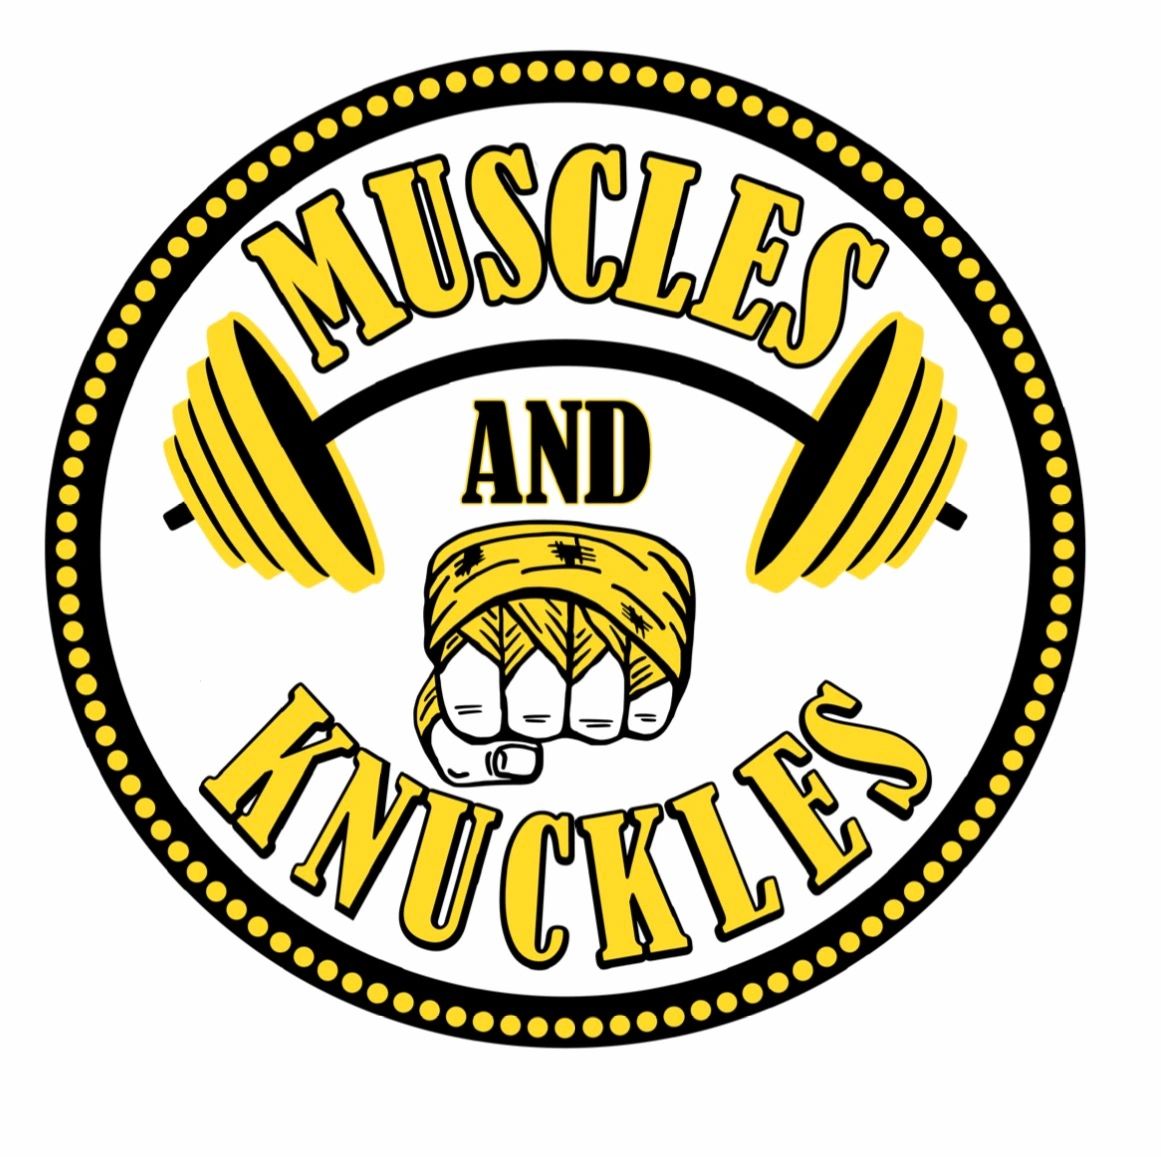 Muscles and Knuckles